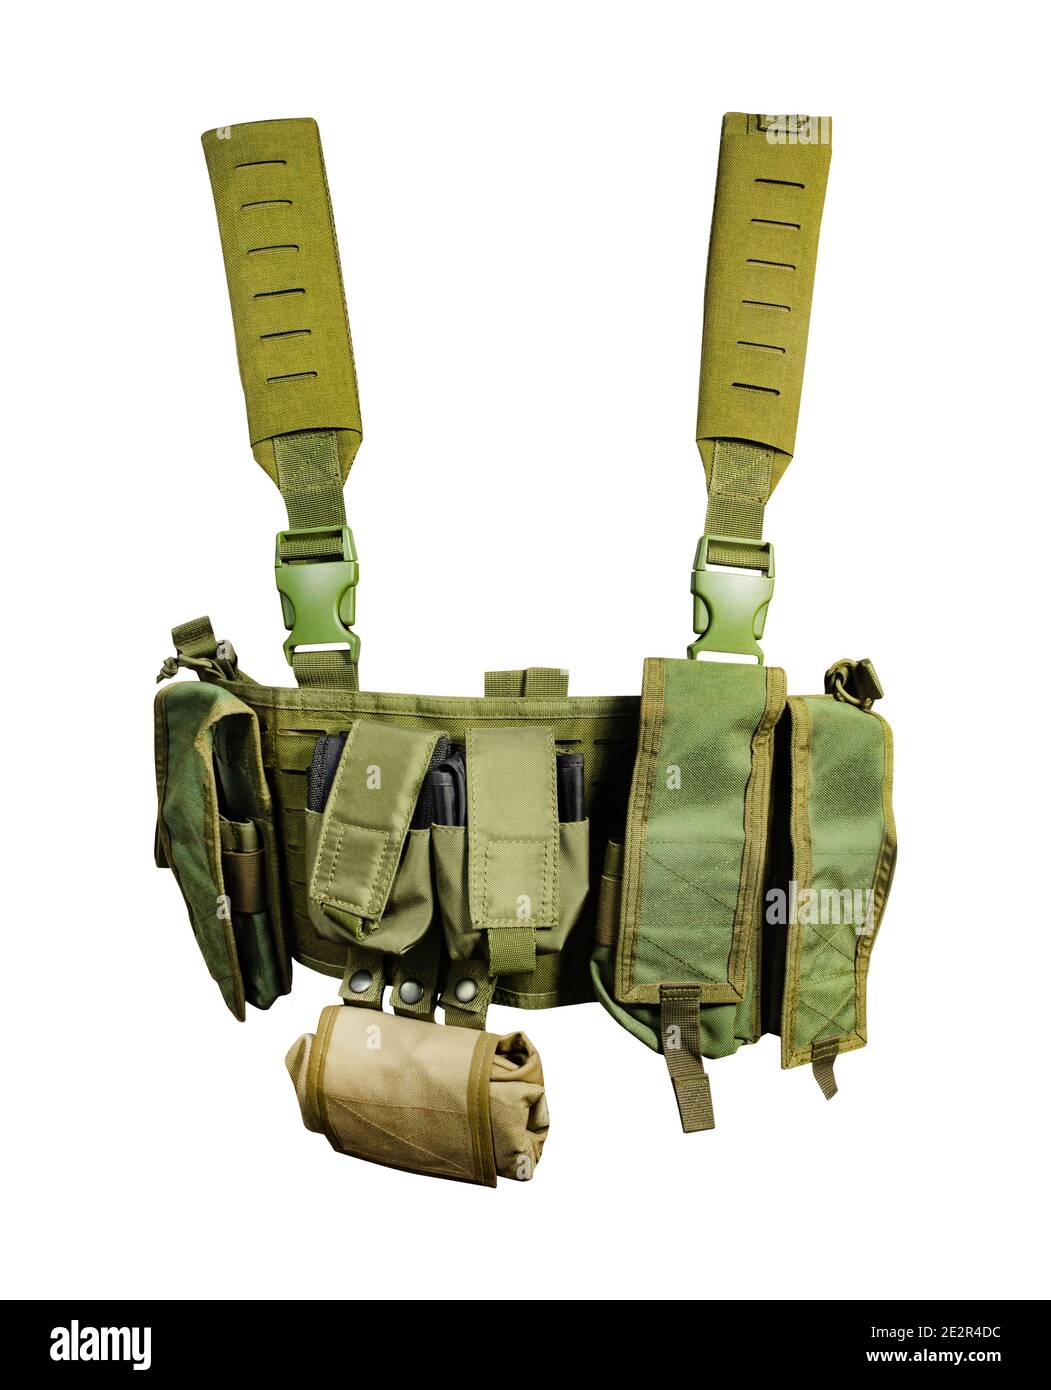 Isolated photo of a khaki colored military soldier pouch vest on white background. Stock Photo